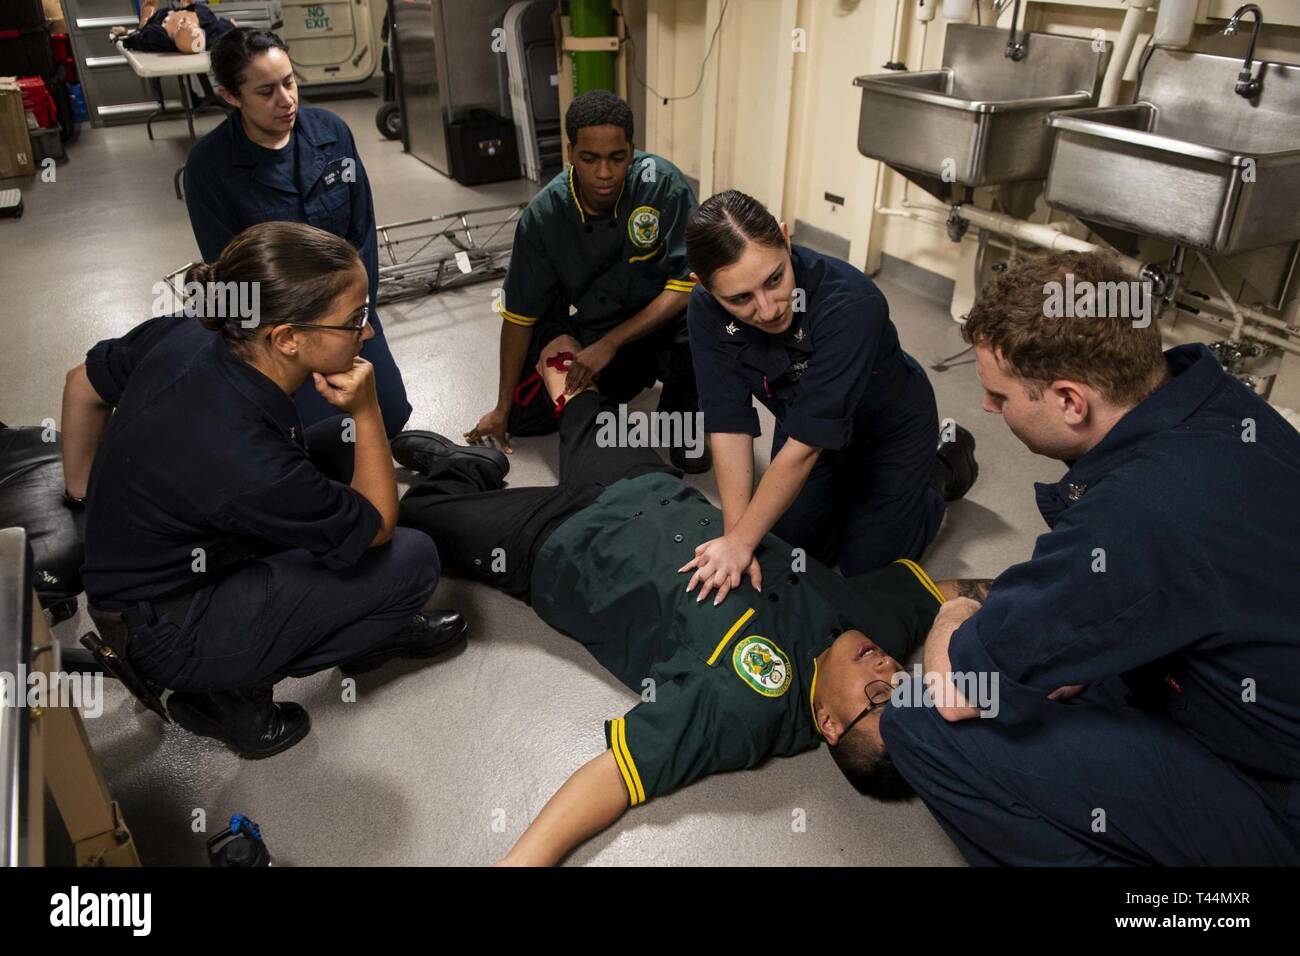 GULF OF THAILAND (Feb. 20, 2019) – Hospital Corpsman 3rd Class Leticia Luna, from Long Beach, Calif., demonstrates proper cardiopulmonary resuscitation (CPR) procedures on a simulated patient aboard the amphibious transport dock ship USS Green Bay (LPD 20) during a medical training evolution. Green Bay, part of the Wasp Amphibious Ready Group, with embarked 31st Marine Expeditionary Unit (MEU), is in Thailand to participate in Exercise Cobra Gold 2019. Cobra Gold is a multinational exercise co-sponsored by Thailand and the United States that is designed to advance regional security and effecti Stock Photo